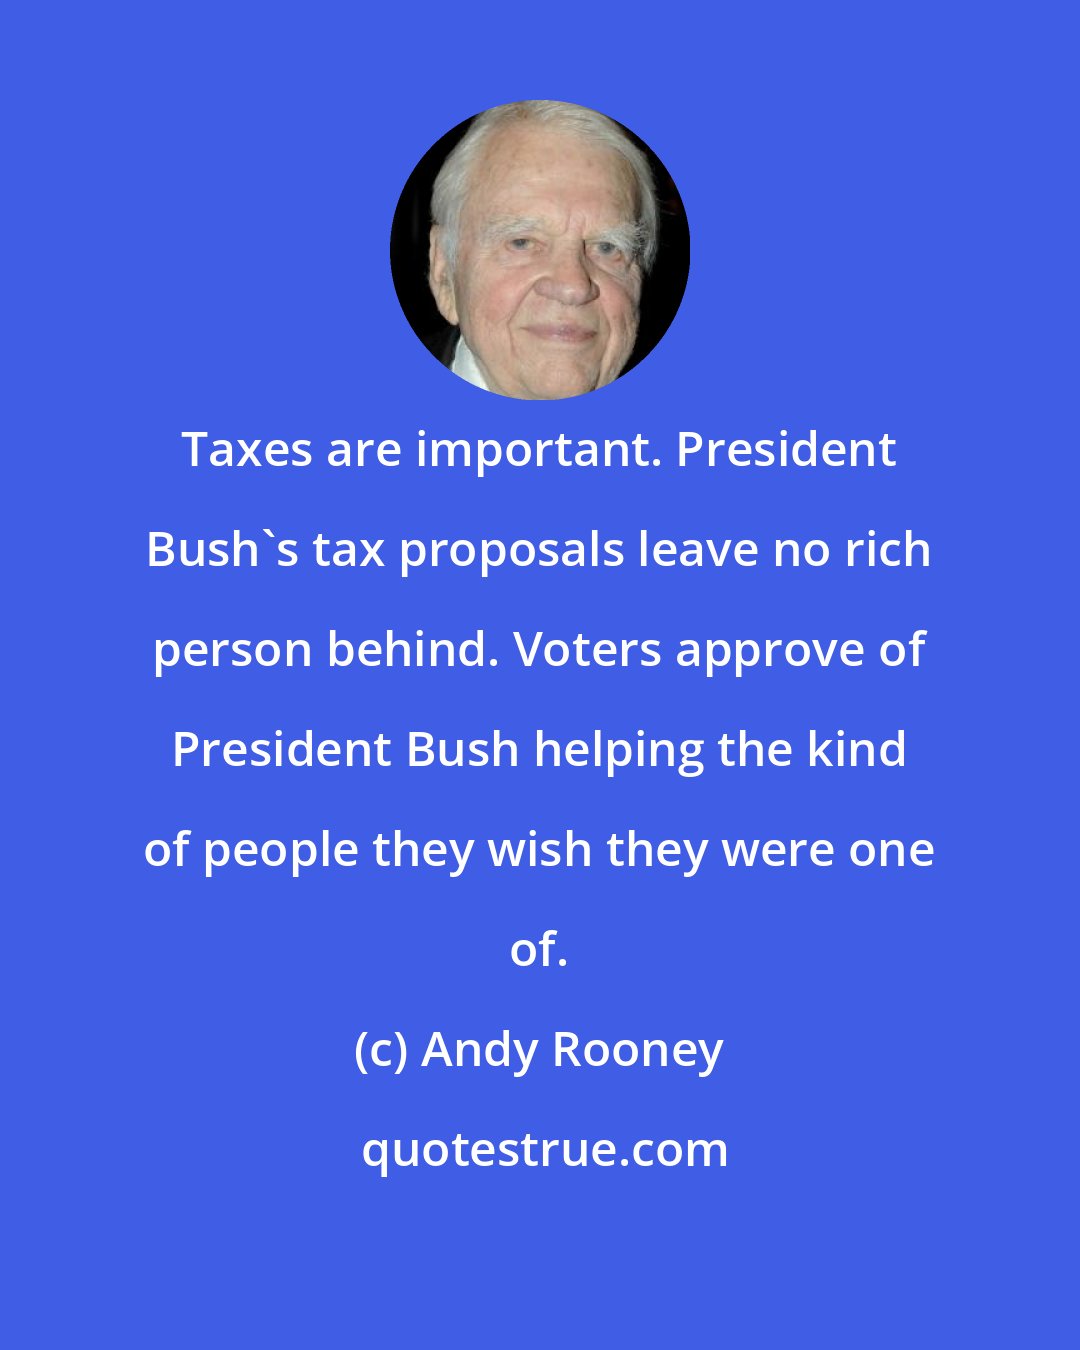 Andy Rooney: Taxes are important. President Bush's tax proposals leave no rich person behind. Voters approve of President Bush helping the kind of people they wish they were one of.